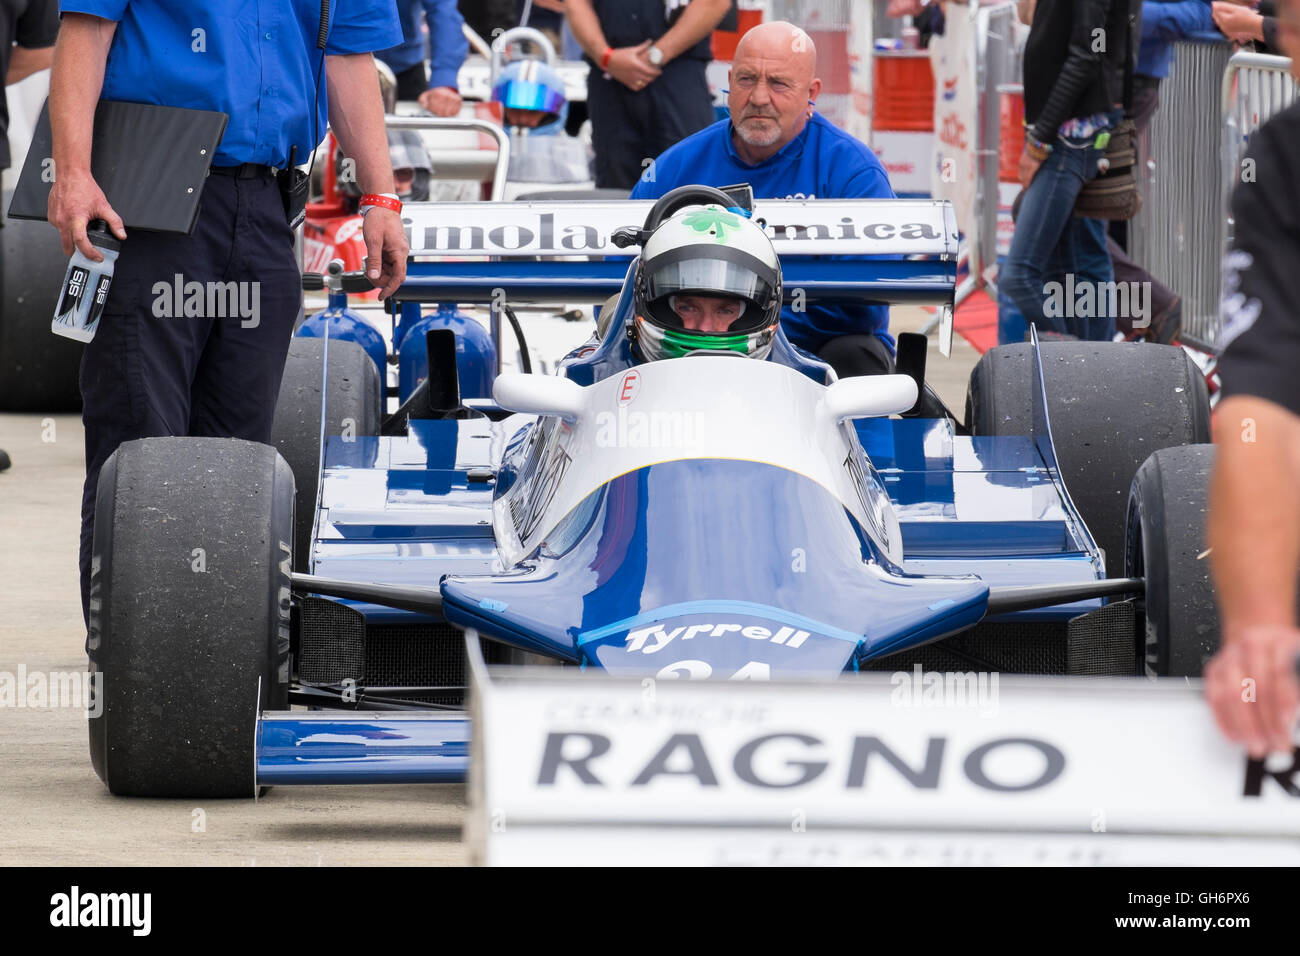 Mike Cantillon, Tyrrell 010 in the paddock, FIA Masters Historic Formula 1 race, 2016 Silverstone Classic event, England, UK Stock Photo